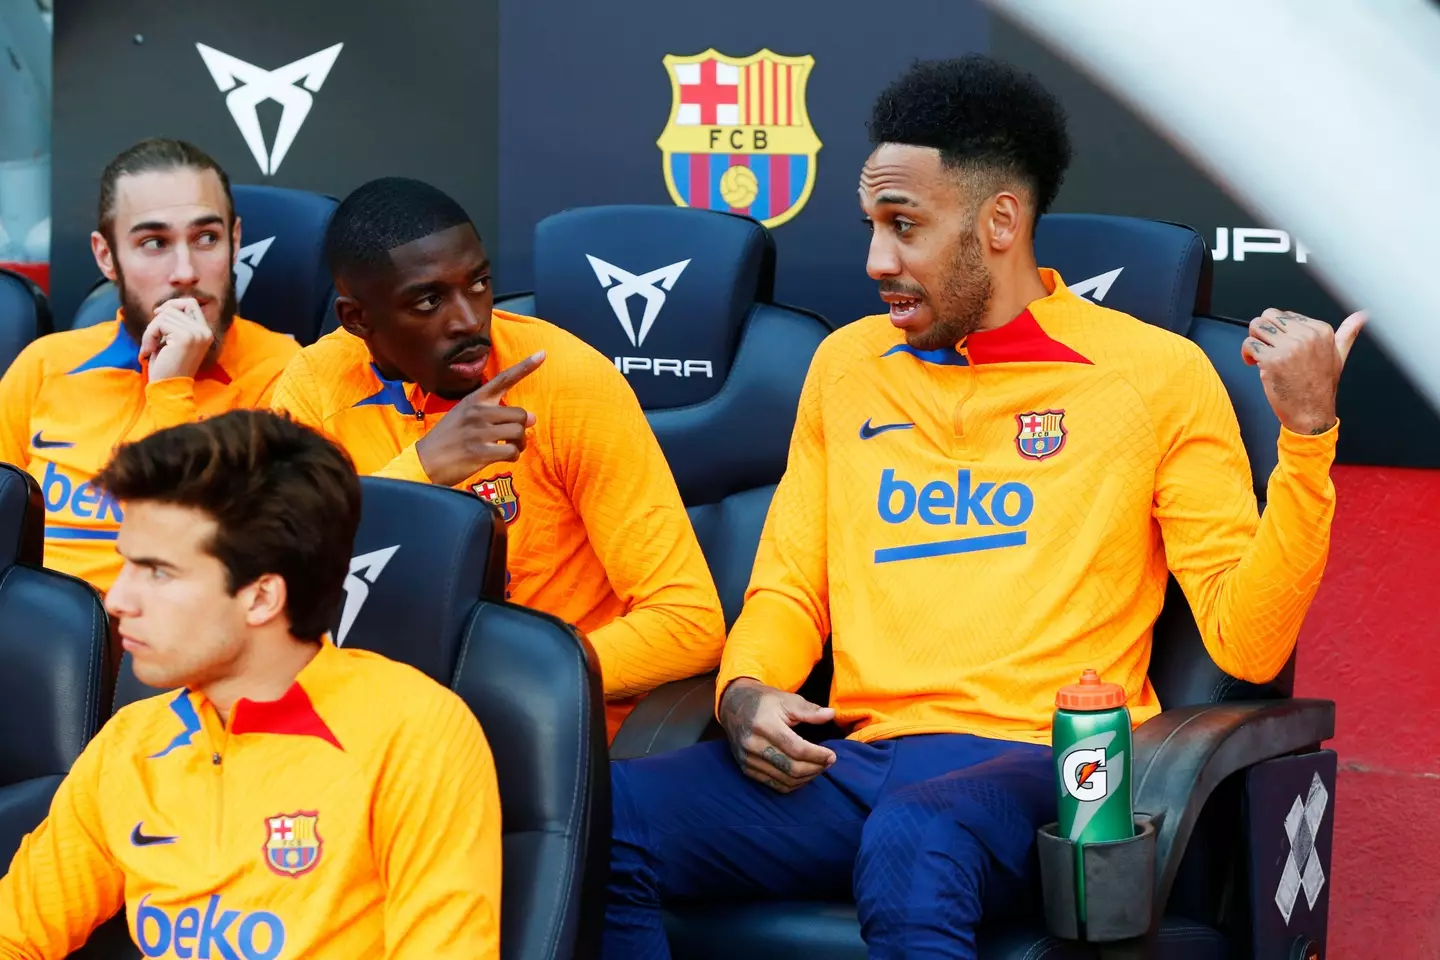 Dembele remained on the bench, but Aubameyang did make it on. Image: PA Images